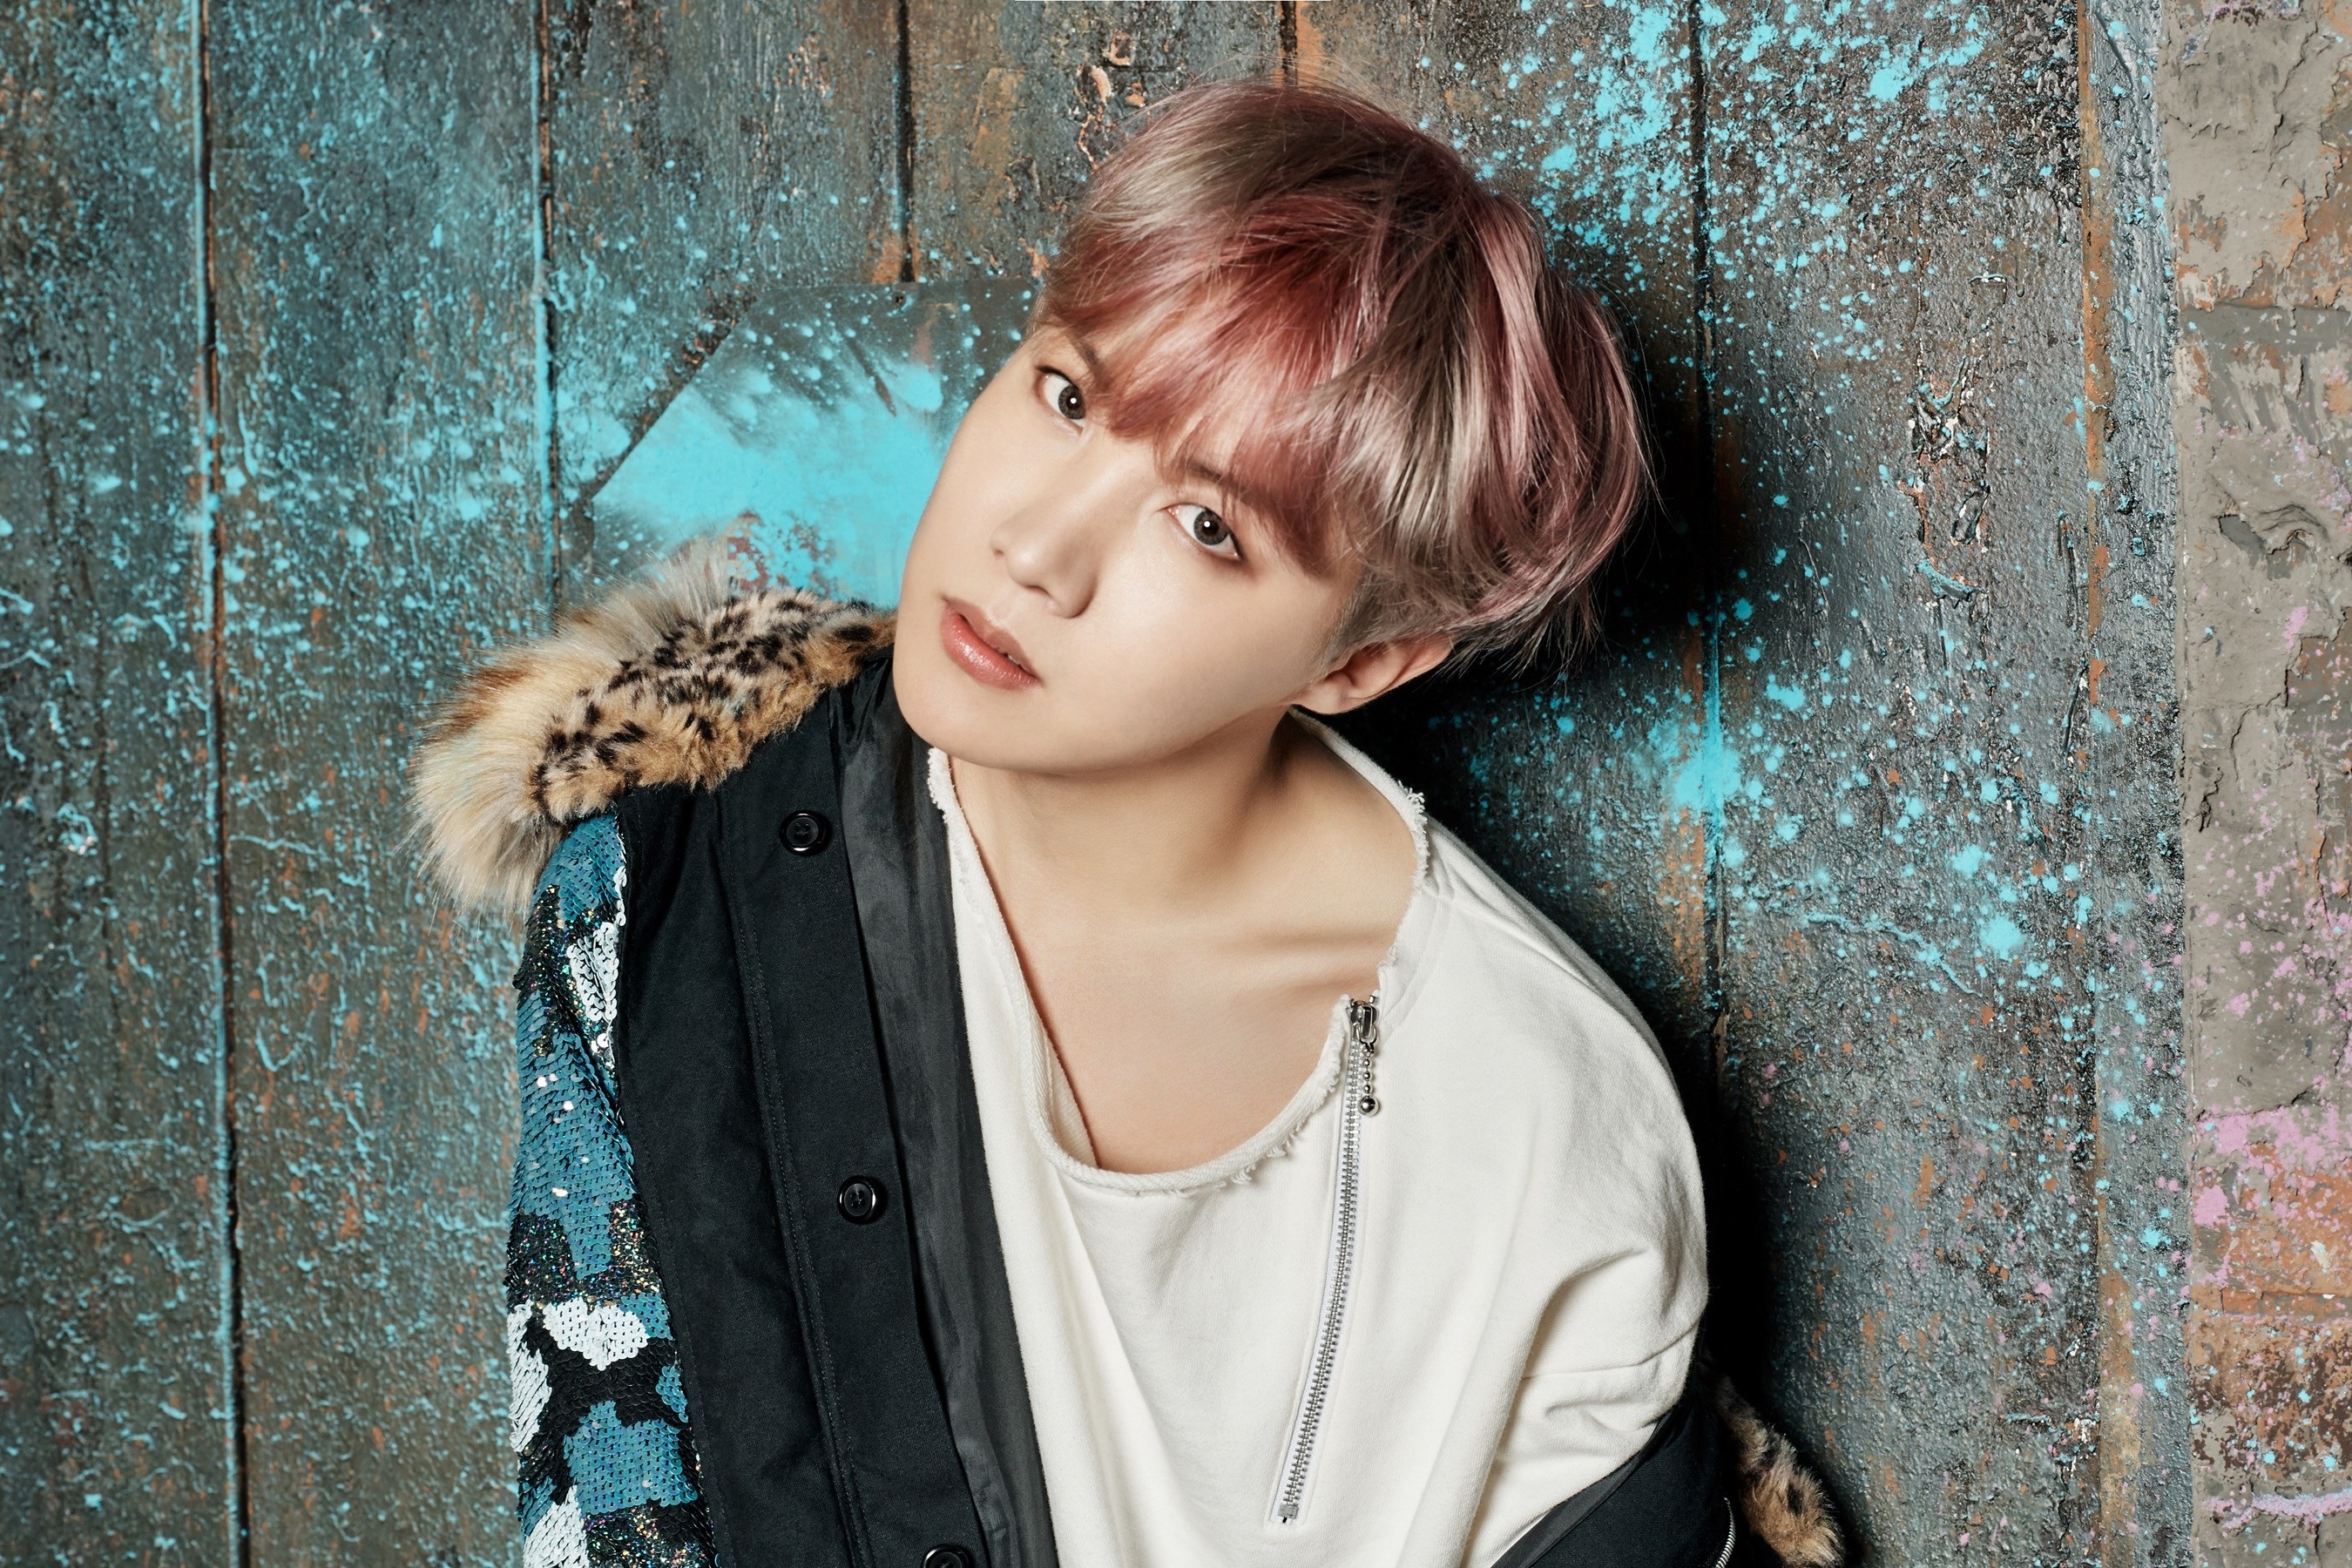 The rapper, dancer and songwriter J-Hope – one of the seven members of the internationally renowned K-pop boy band BTS – celebrates his 25th birthday on February 18.